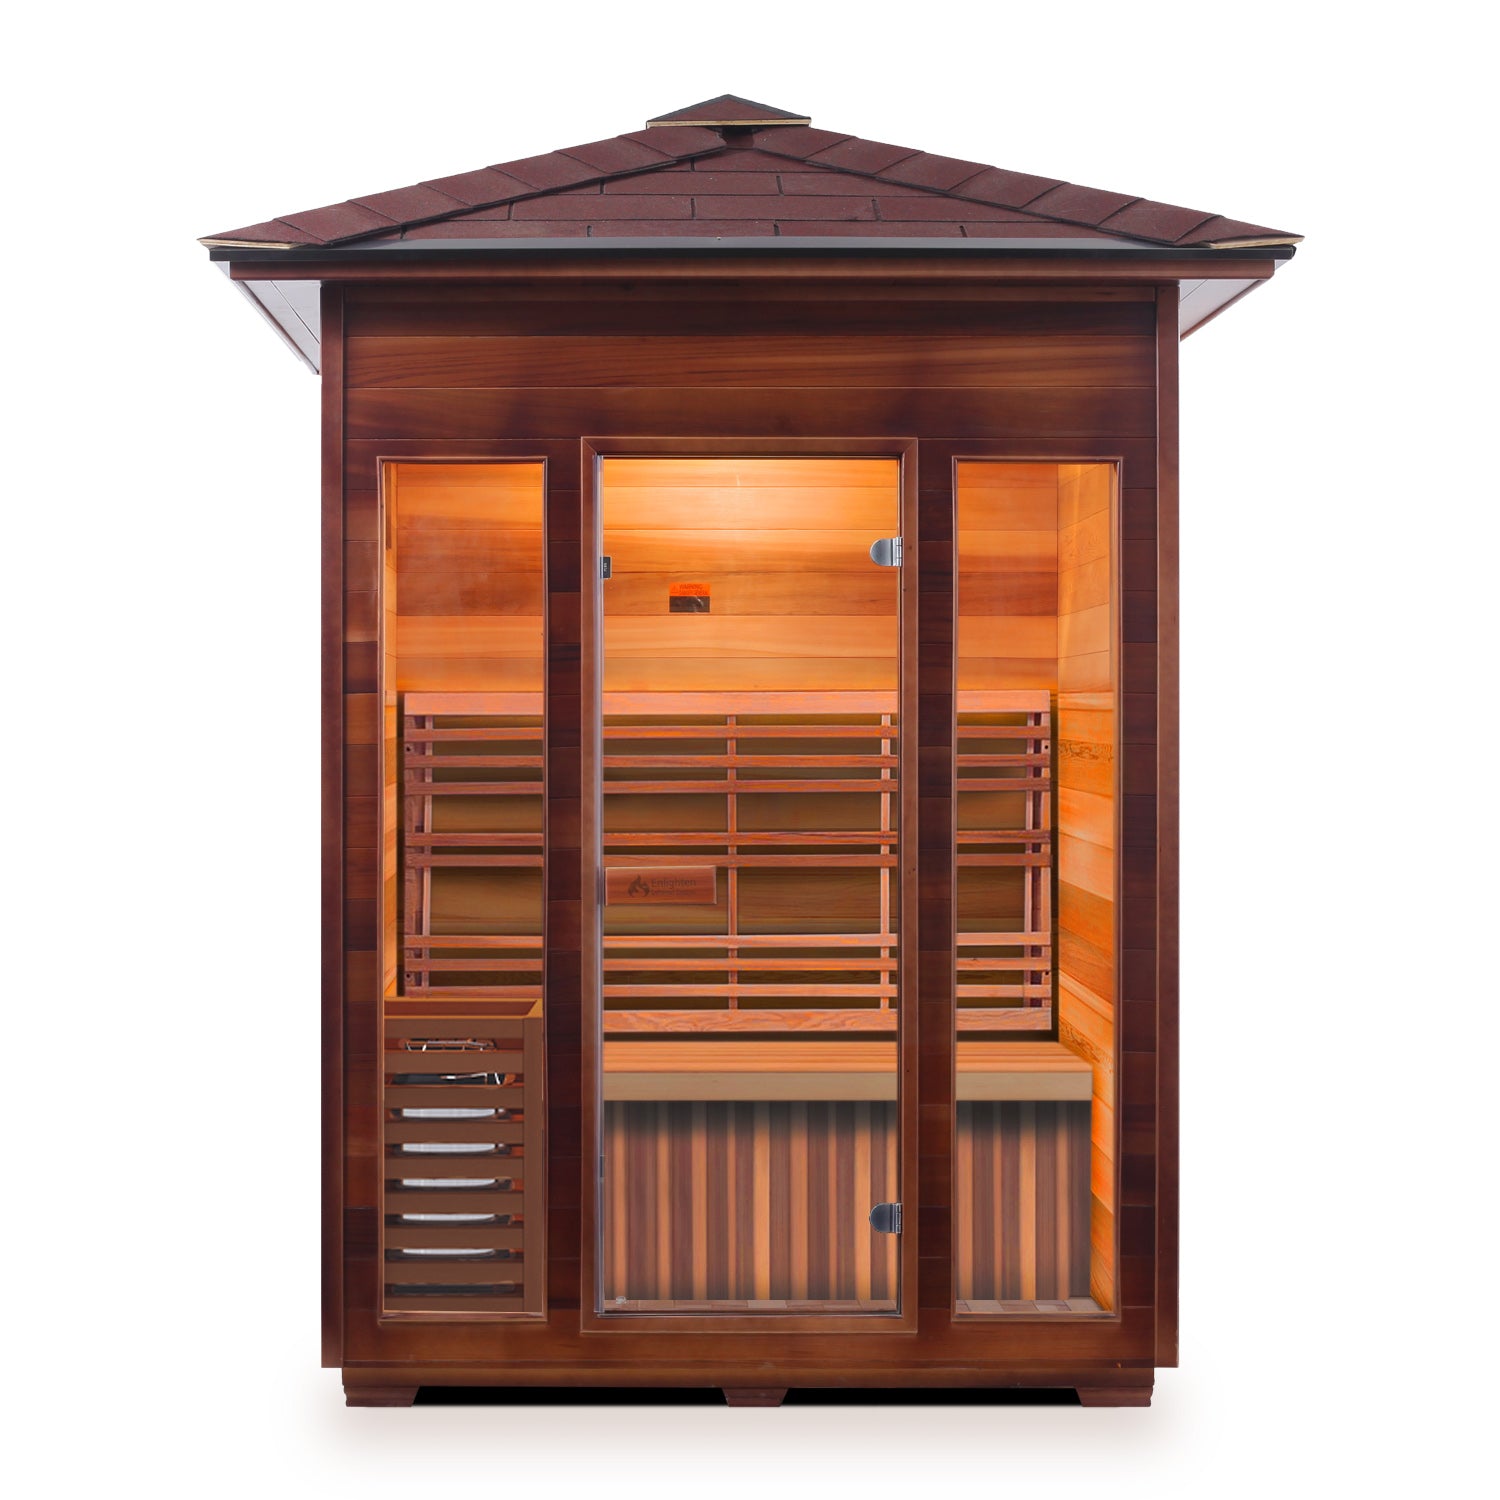 Enlighten Sauna Dry traditional SunRise Outdoor Canadian Red Cedar Wood Outside And Inside Peak Roofed with glass door and windows three person sauna front view